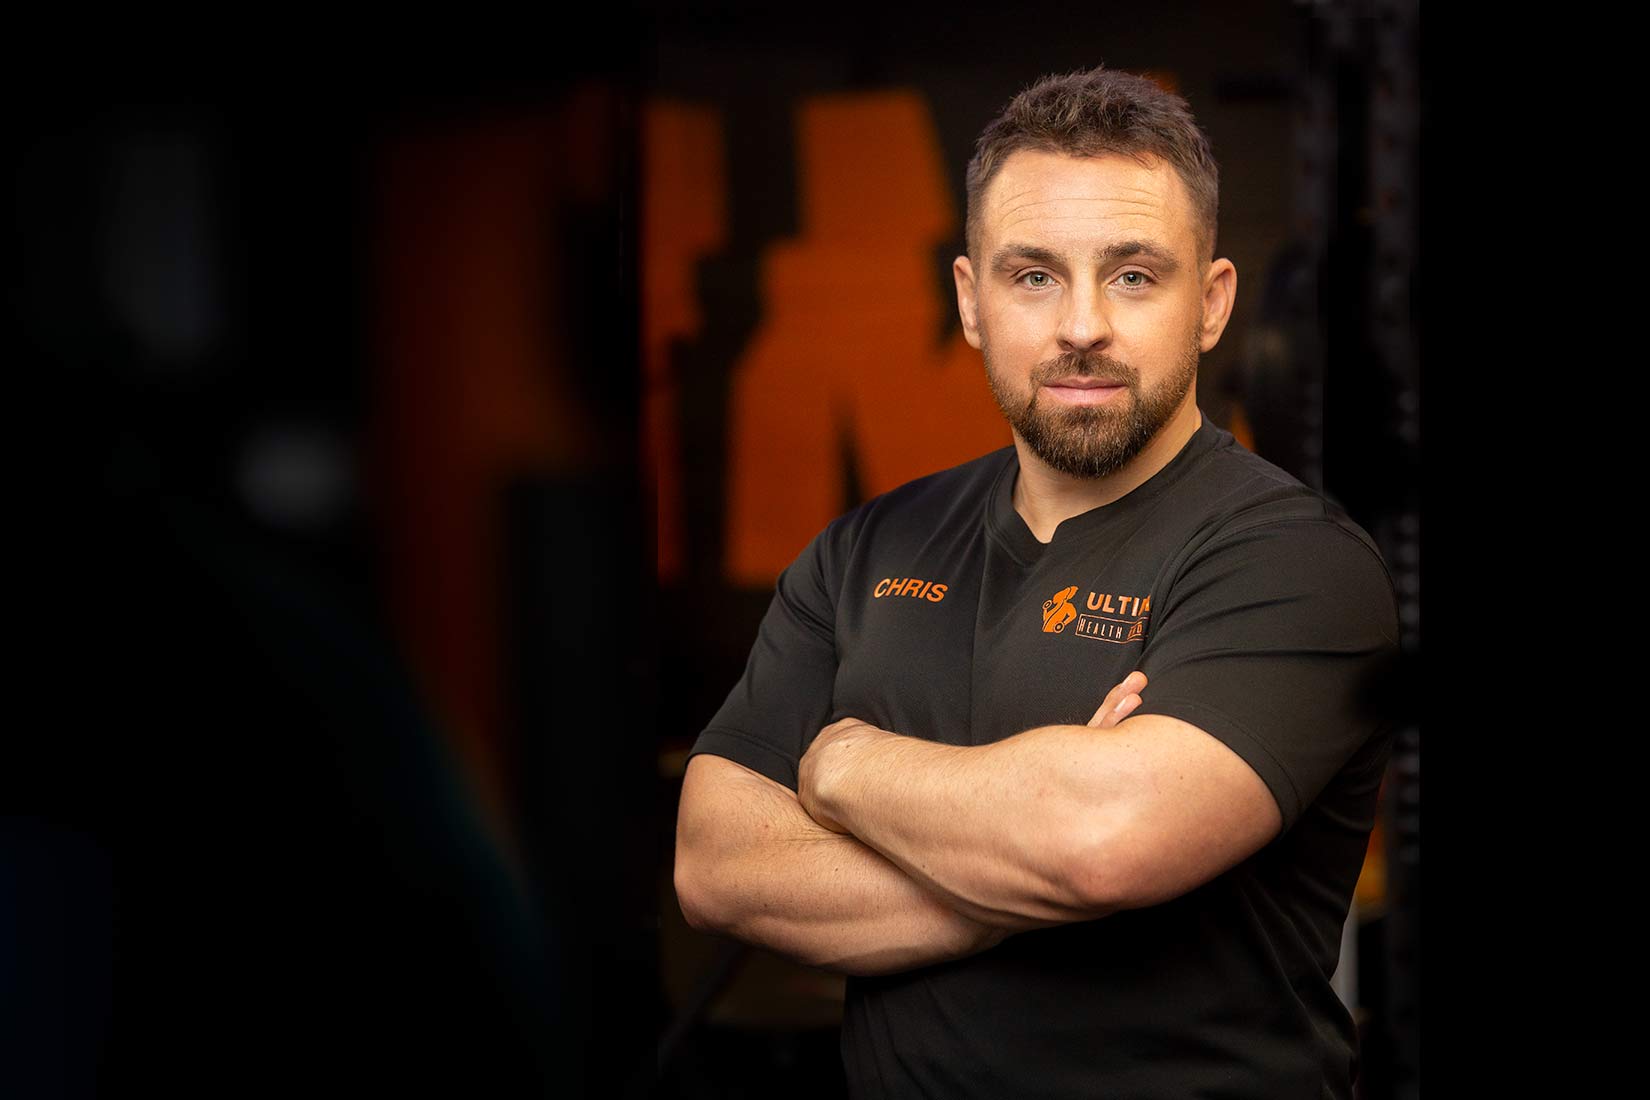 Personal Branding style portrait of a gym owner and coach wearing a black t shirt with arms folded against a dark background. Also called and environmental portraits style